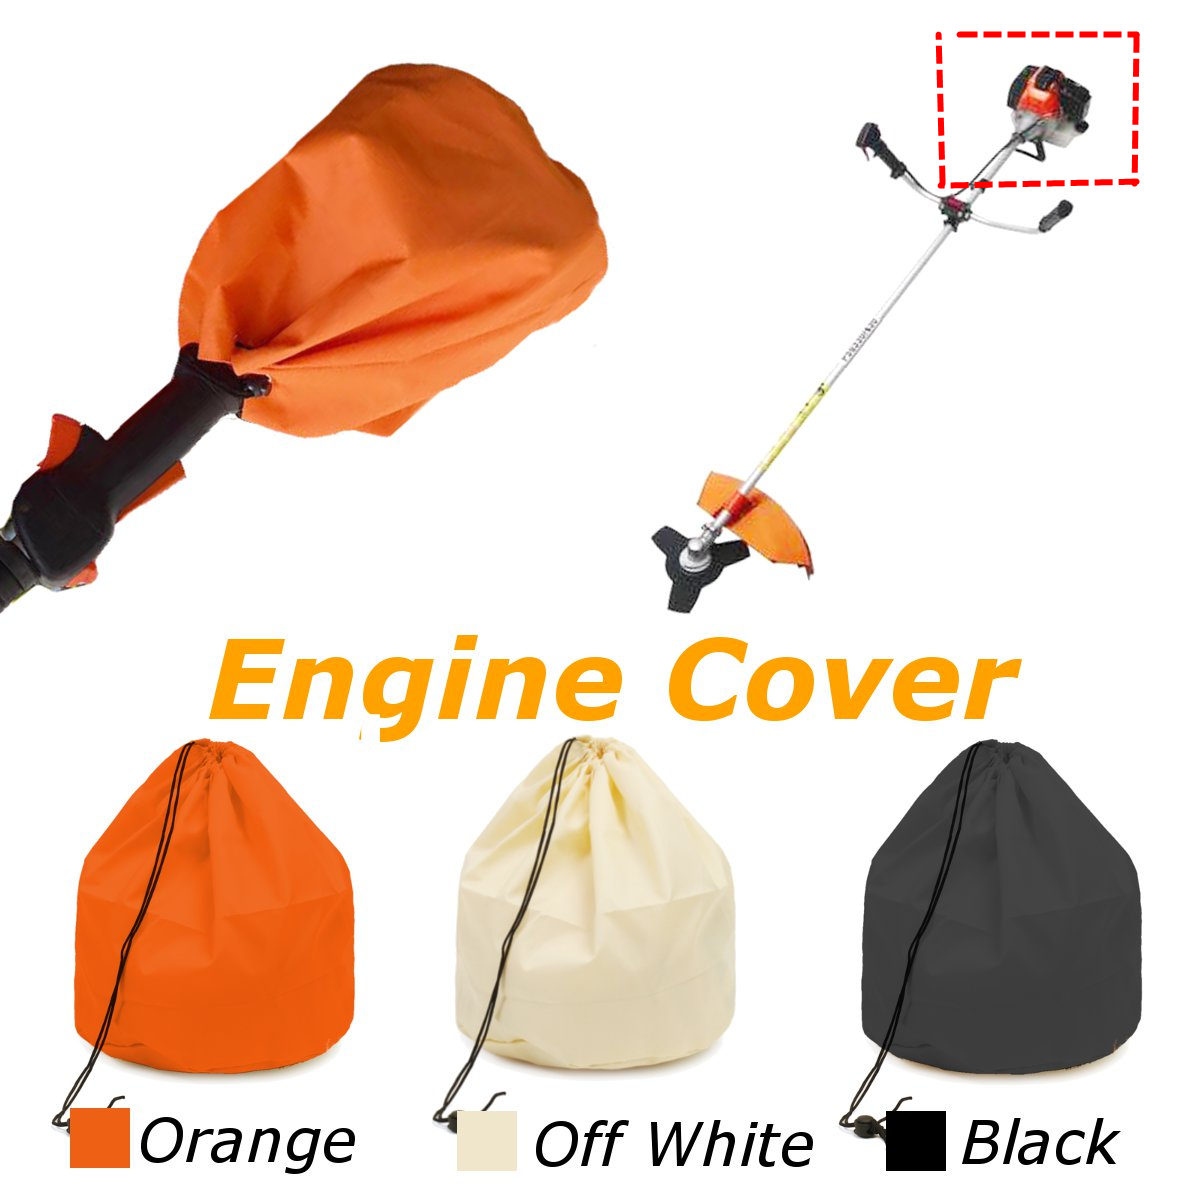 440x325mm-Engine-Cover-Dustproof-Bag-Three-Color-Fits-for-Trimmer-Edger-Pole-saw-1233496-1